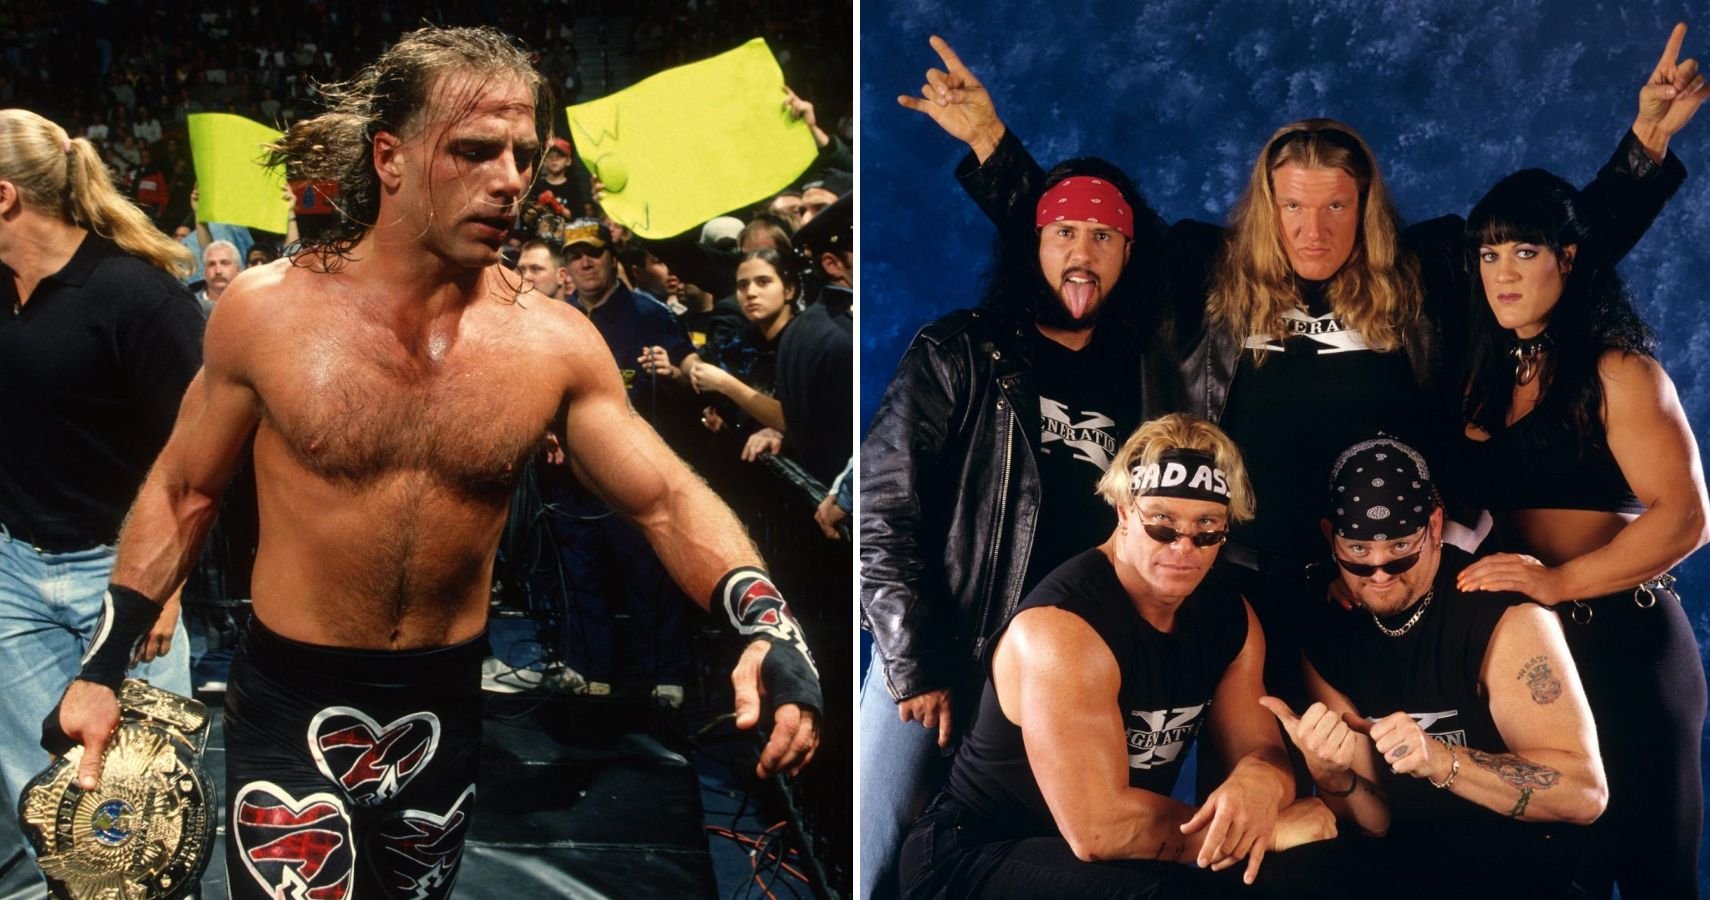 The Best Version Of D-X Was Without Shawn Michaels